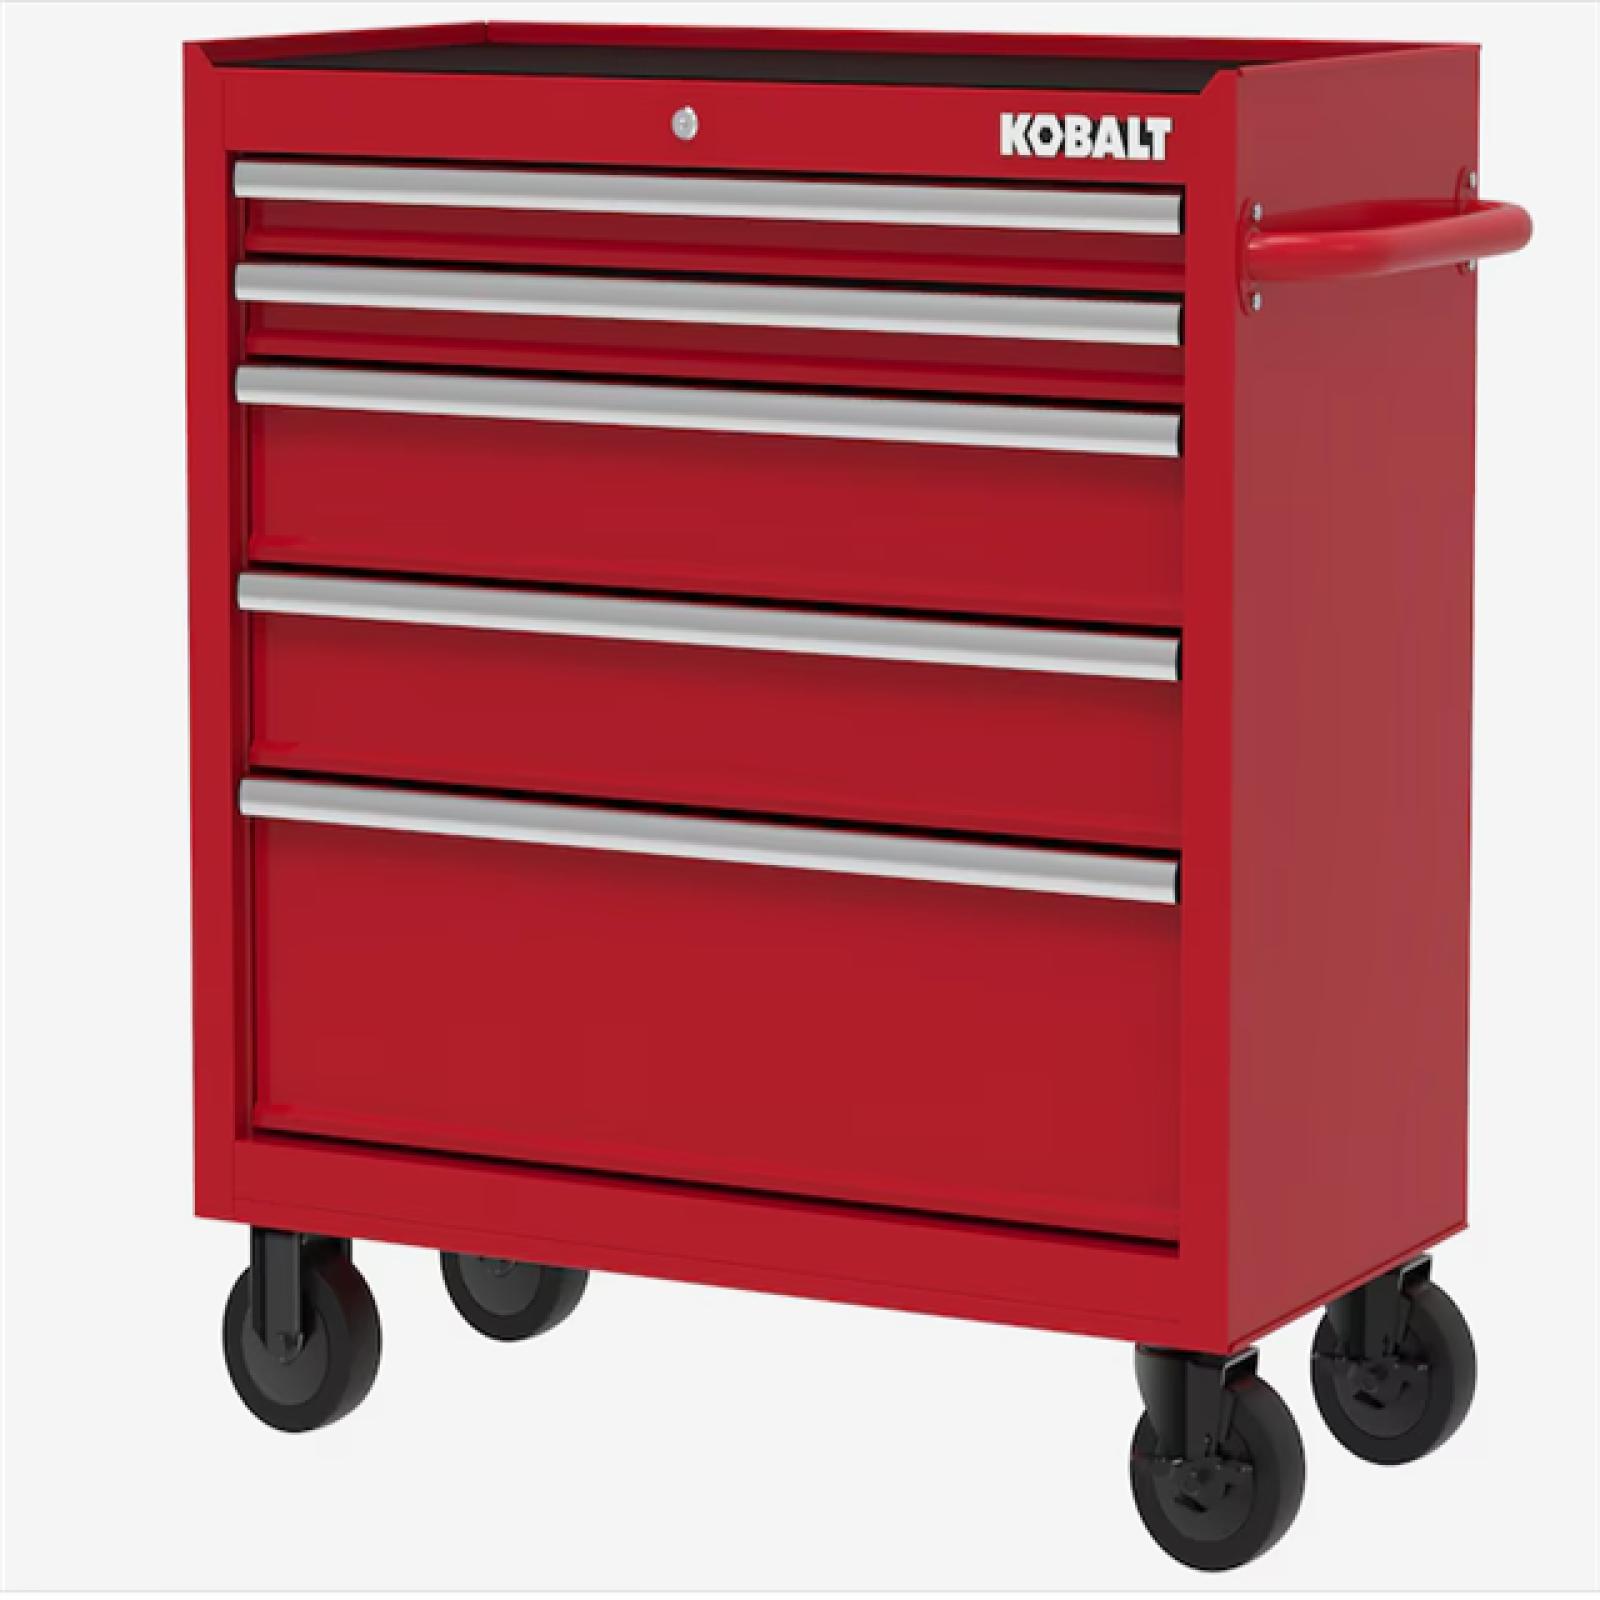 DALLAS LOCATION - Kobalt 36-in W x 38-in H 5-Drawer Steel Rolling Tool Cabinet (Red) PALLET - (4 UNITS)